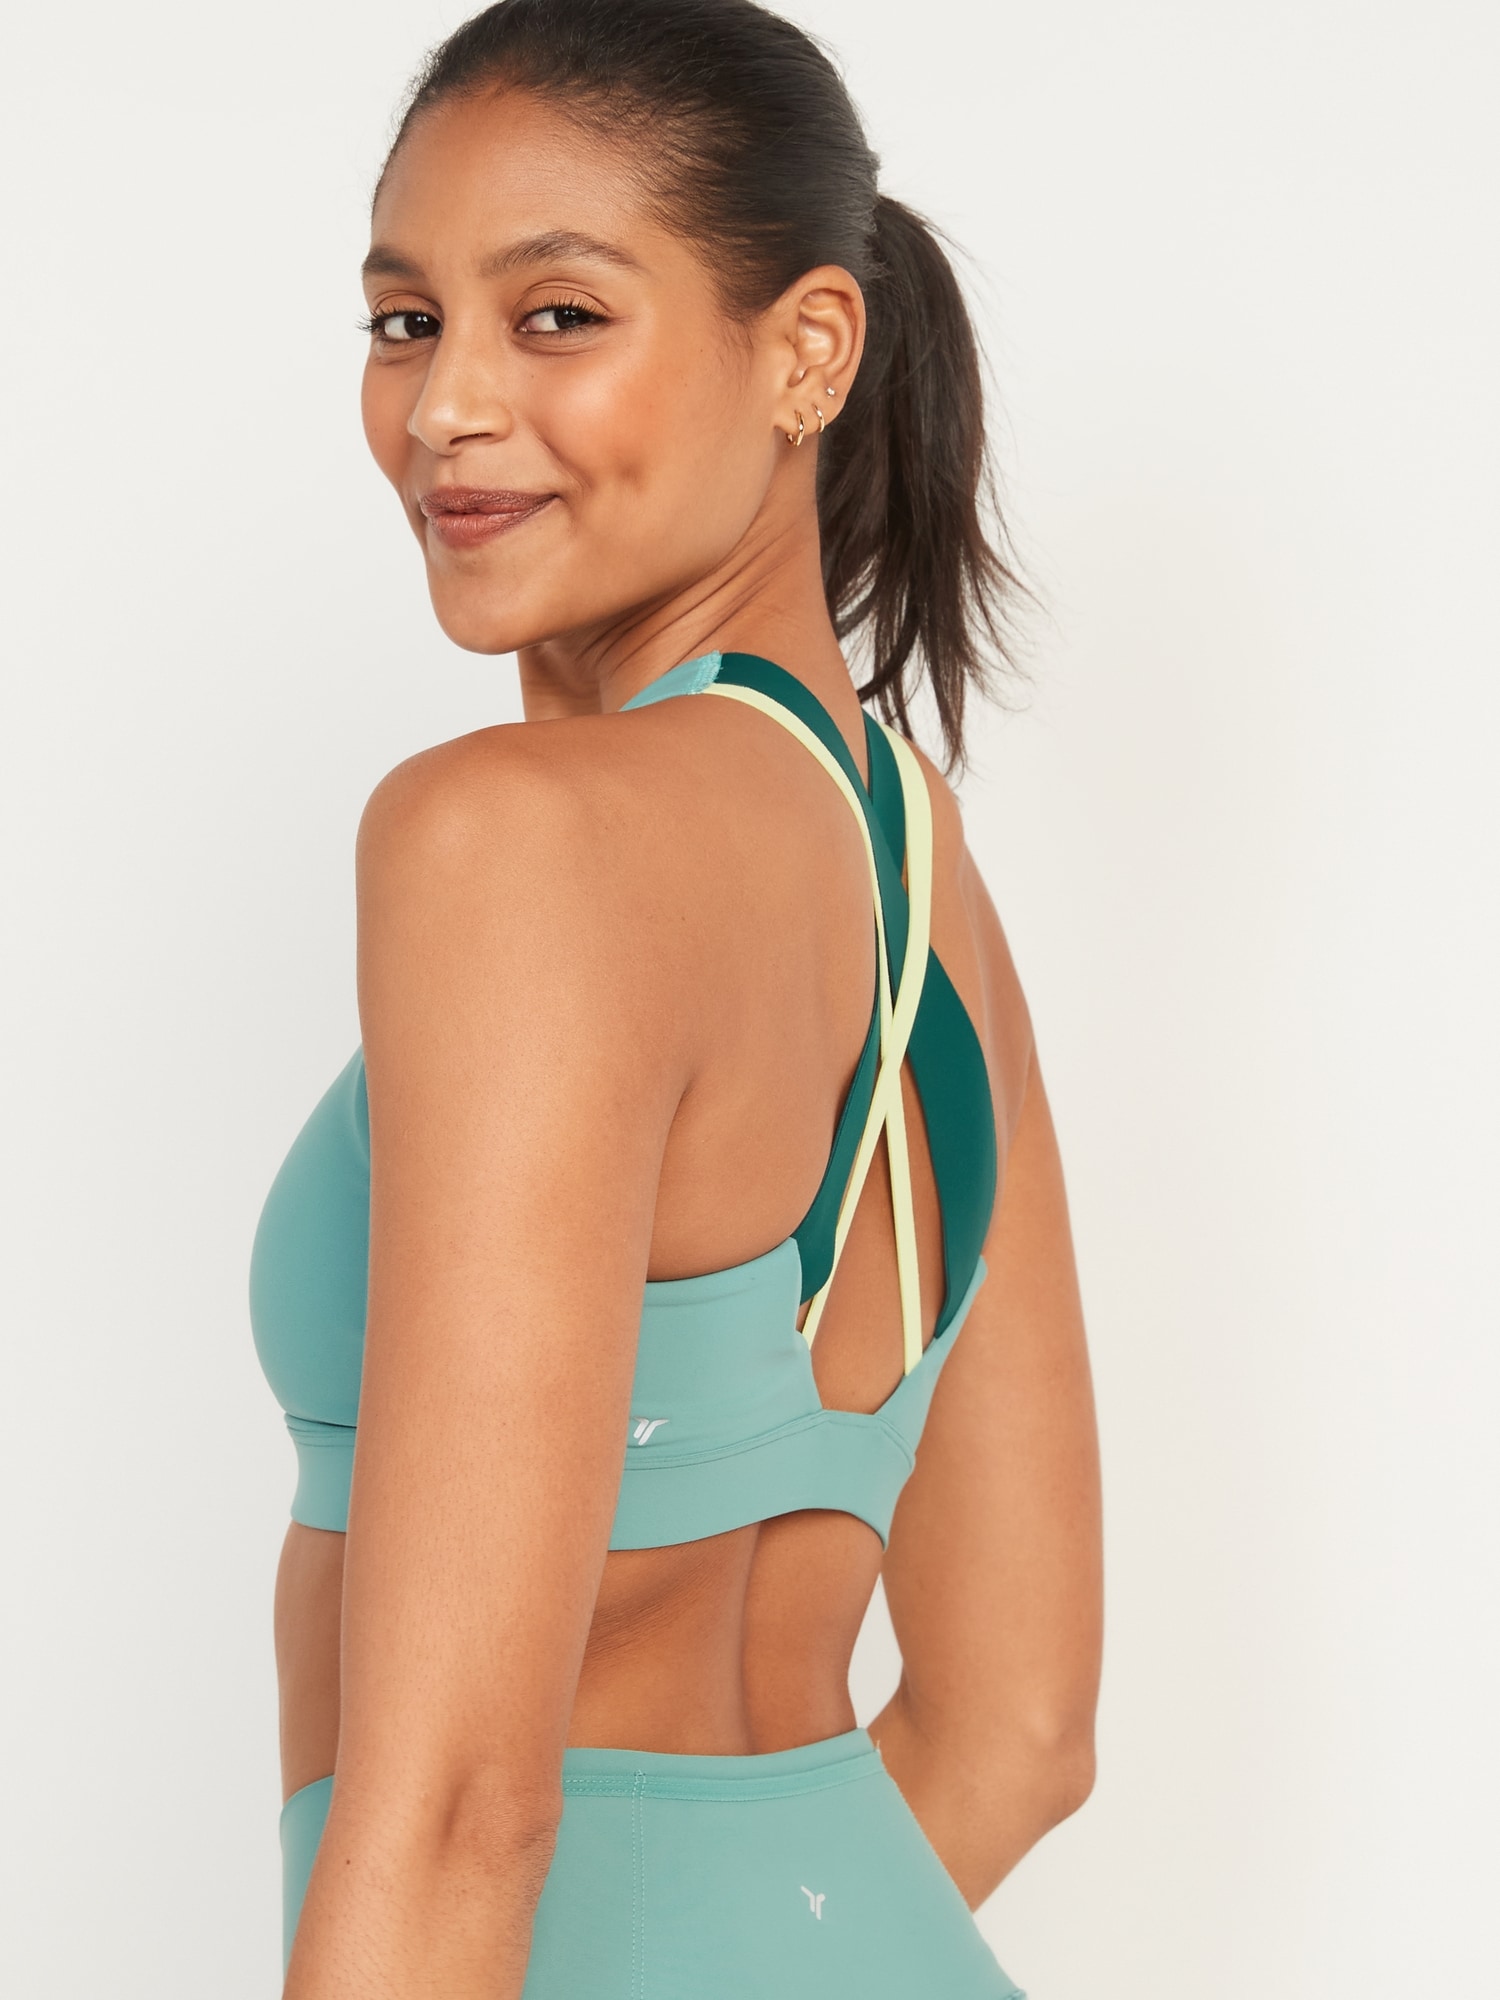 Old Navy Medium Support Powersoft Bonded-Strap Plus Size Sports